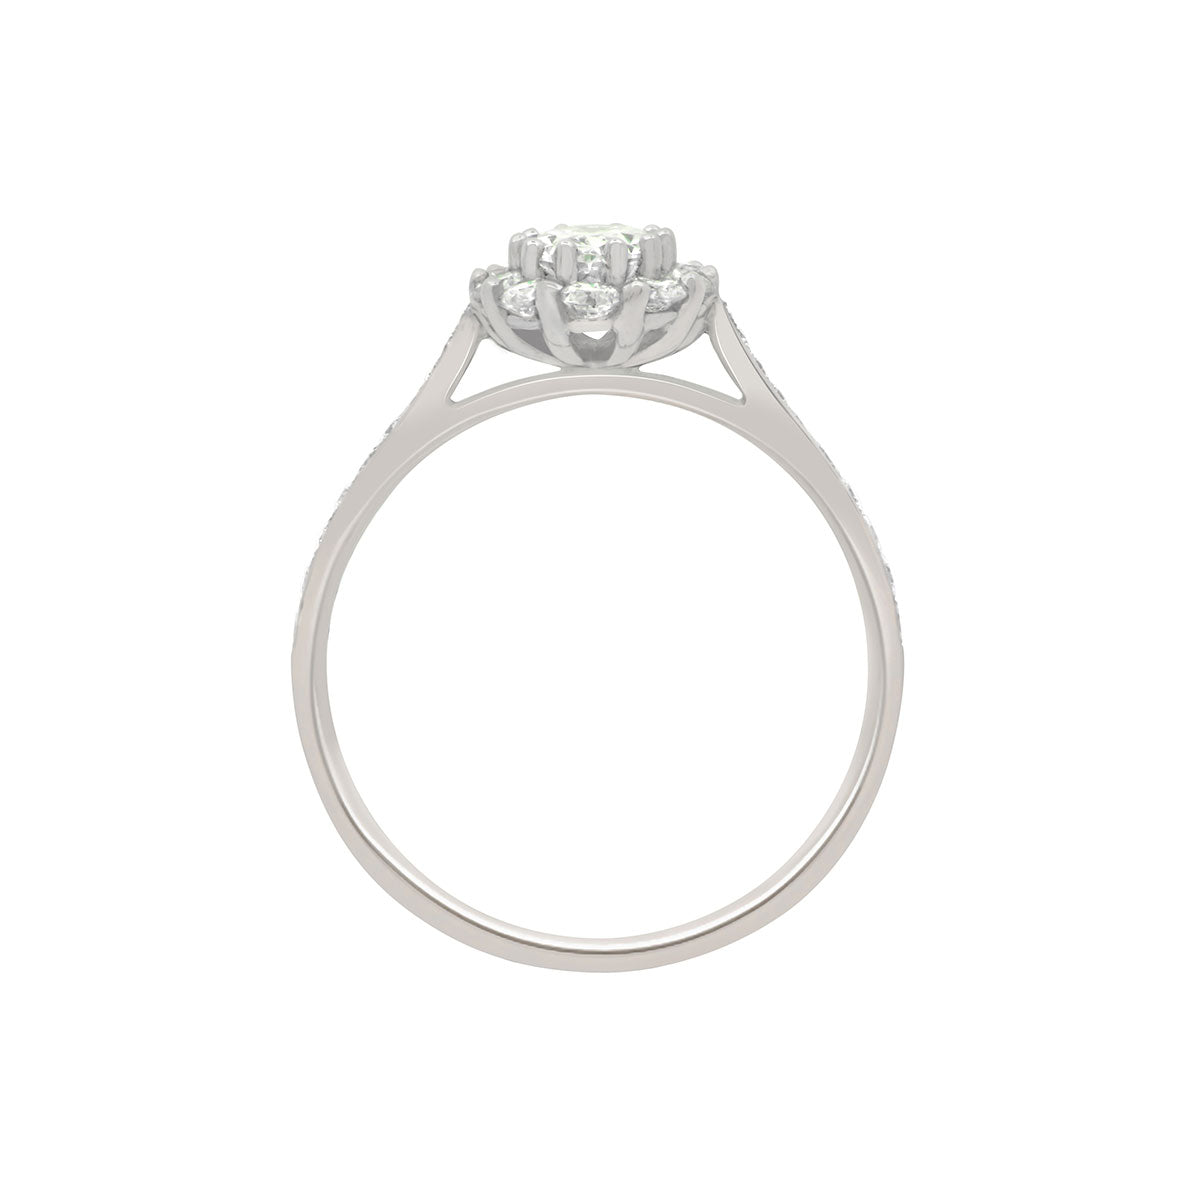 Cluster Engagement Ring with diamond shoulders in white gold viewed standing upright